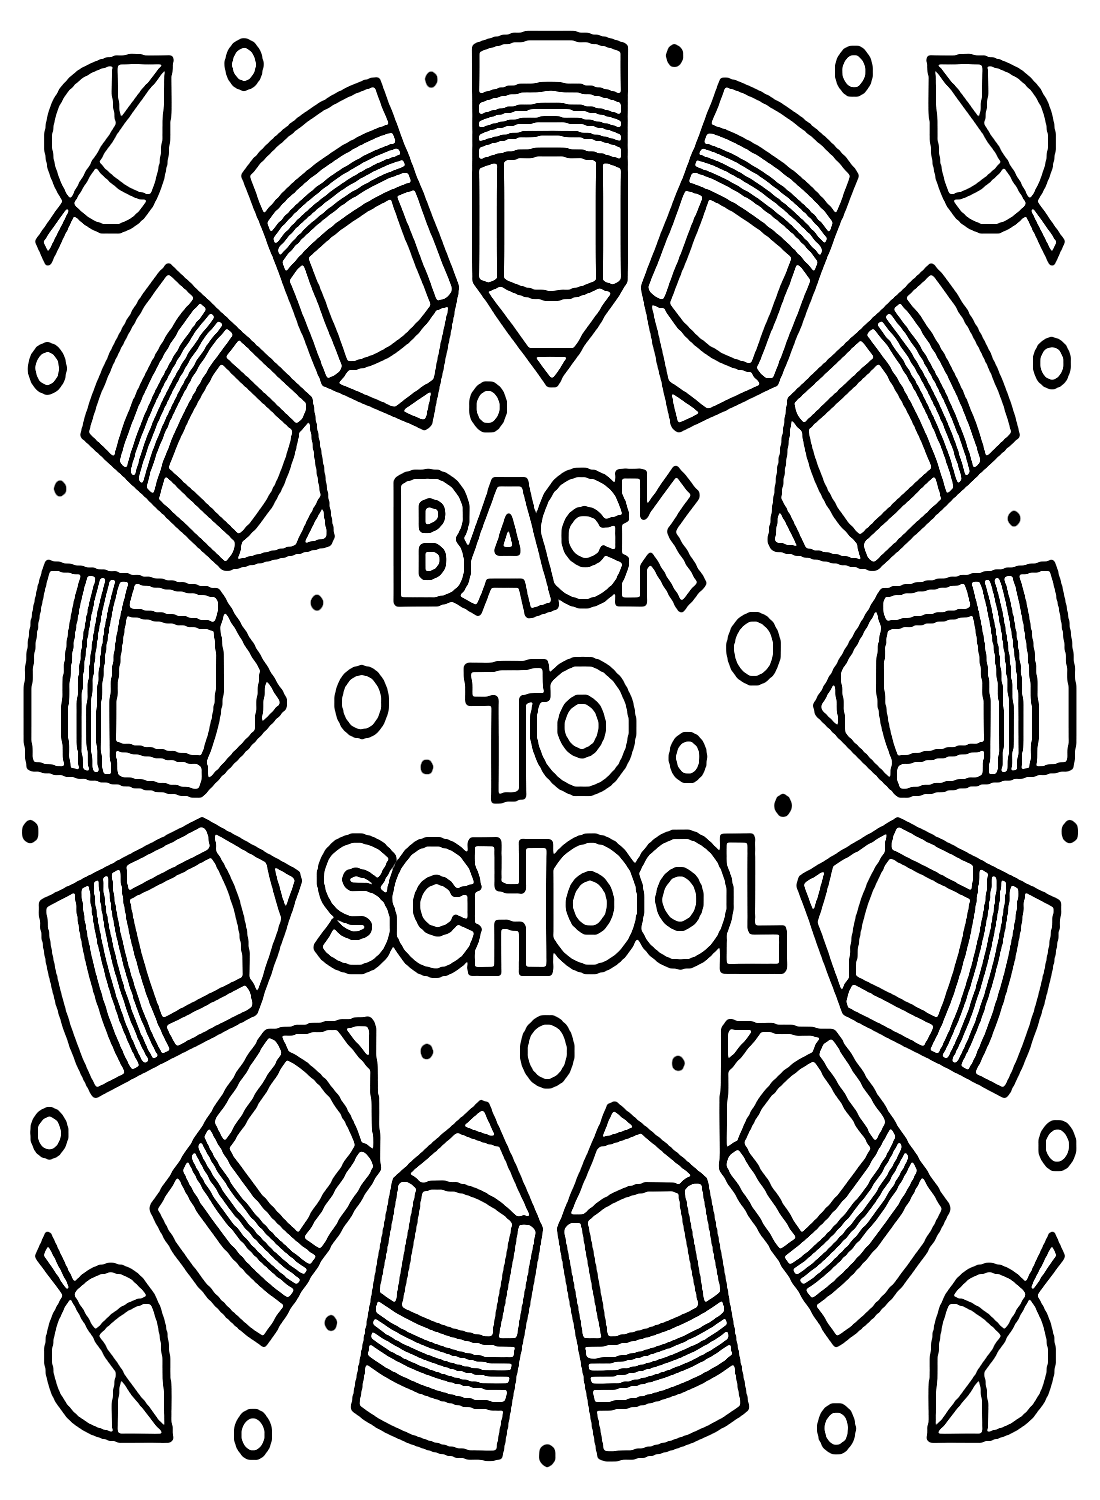 Back to School Coloring Pages Online from Back to School